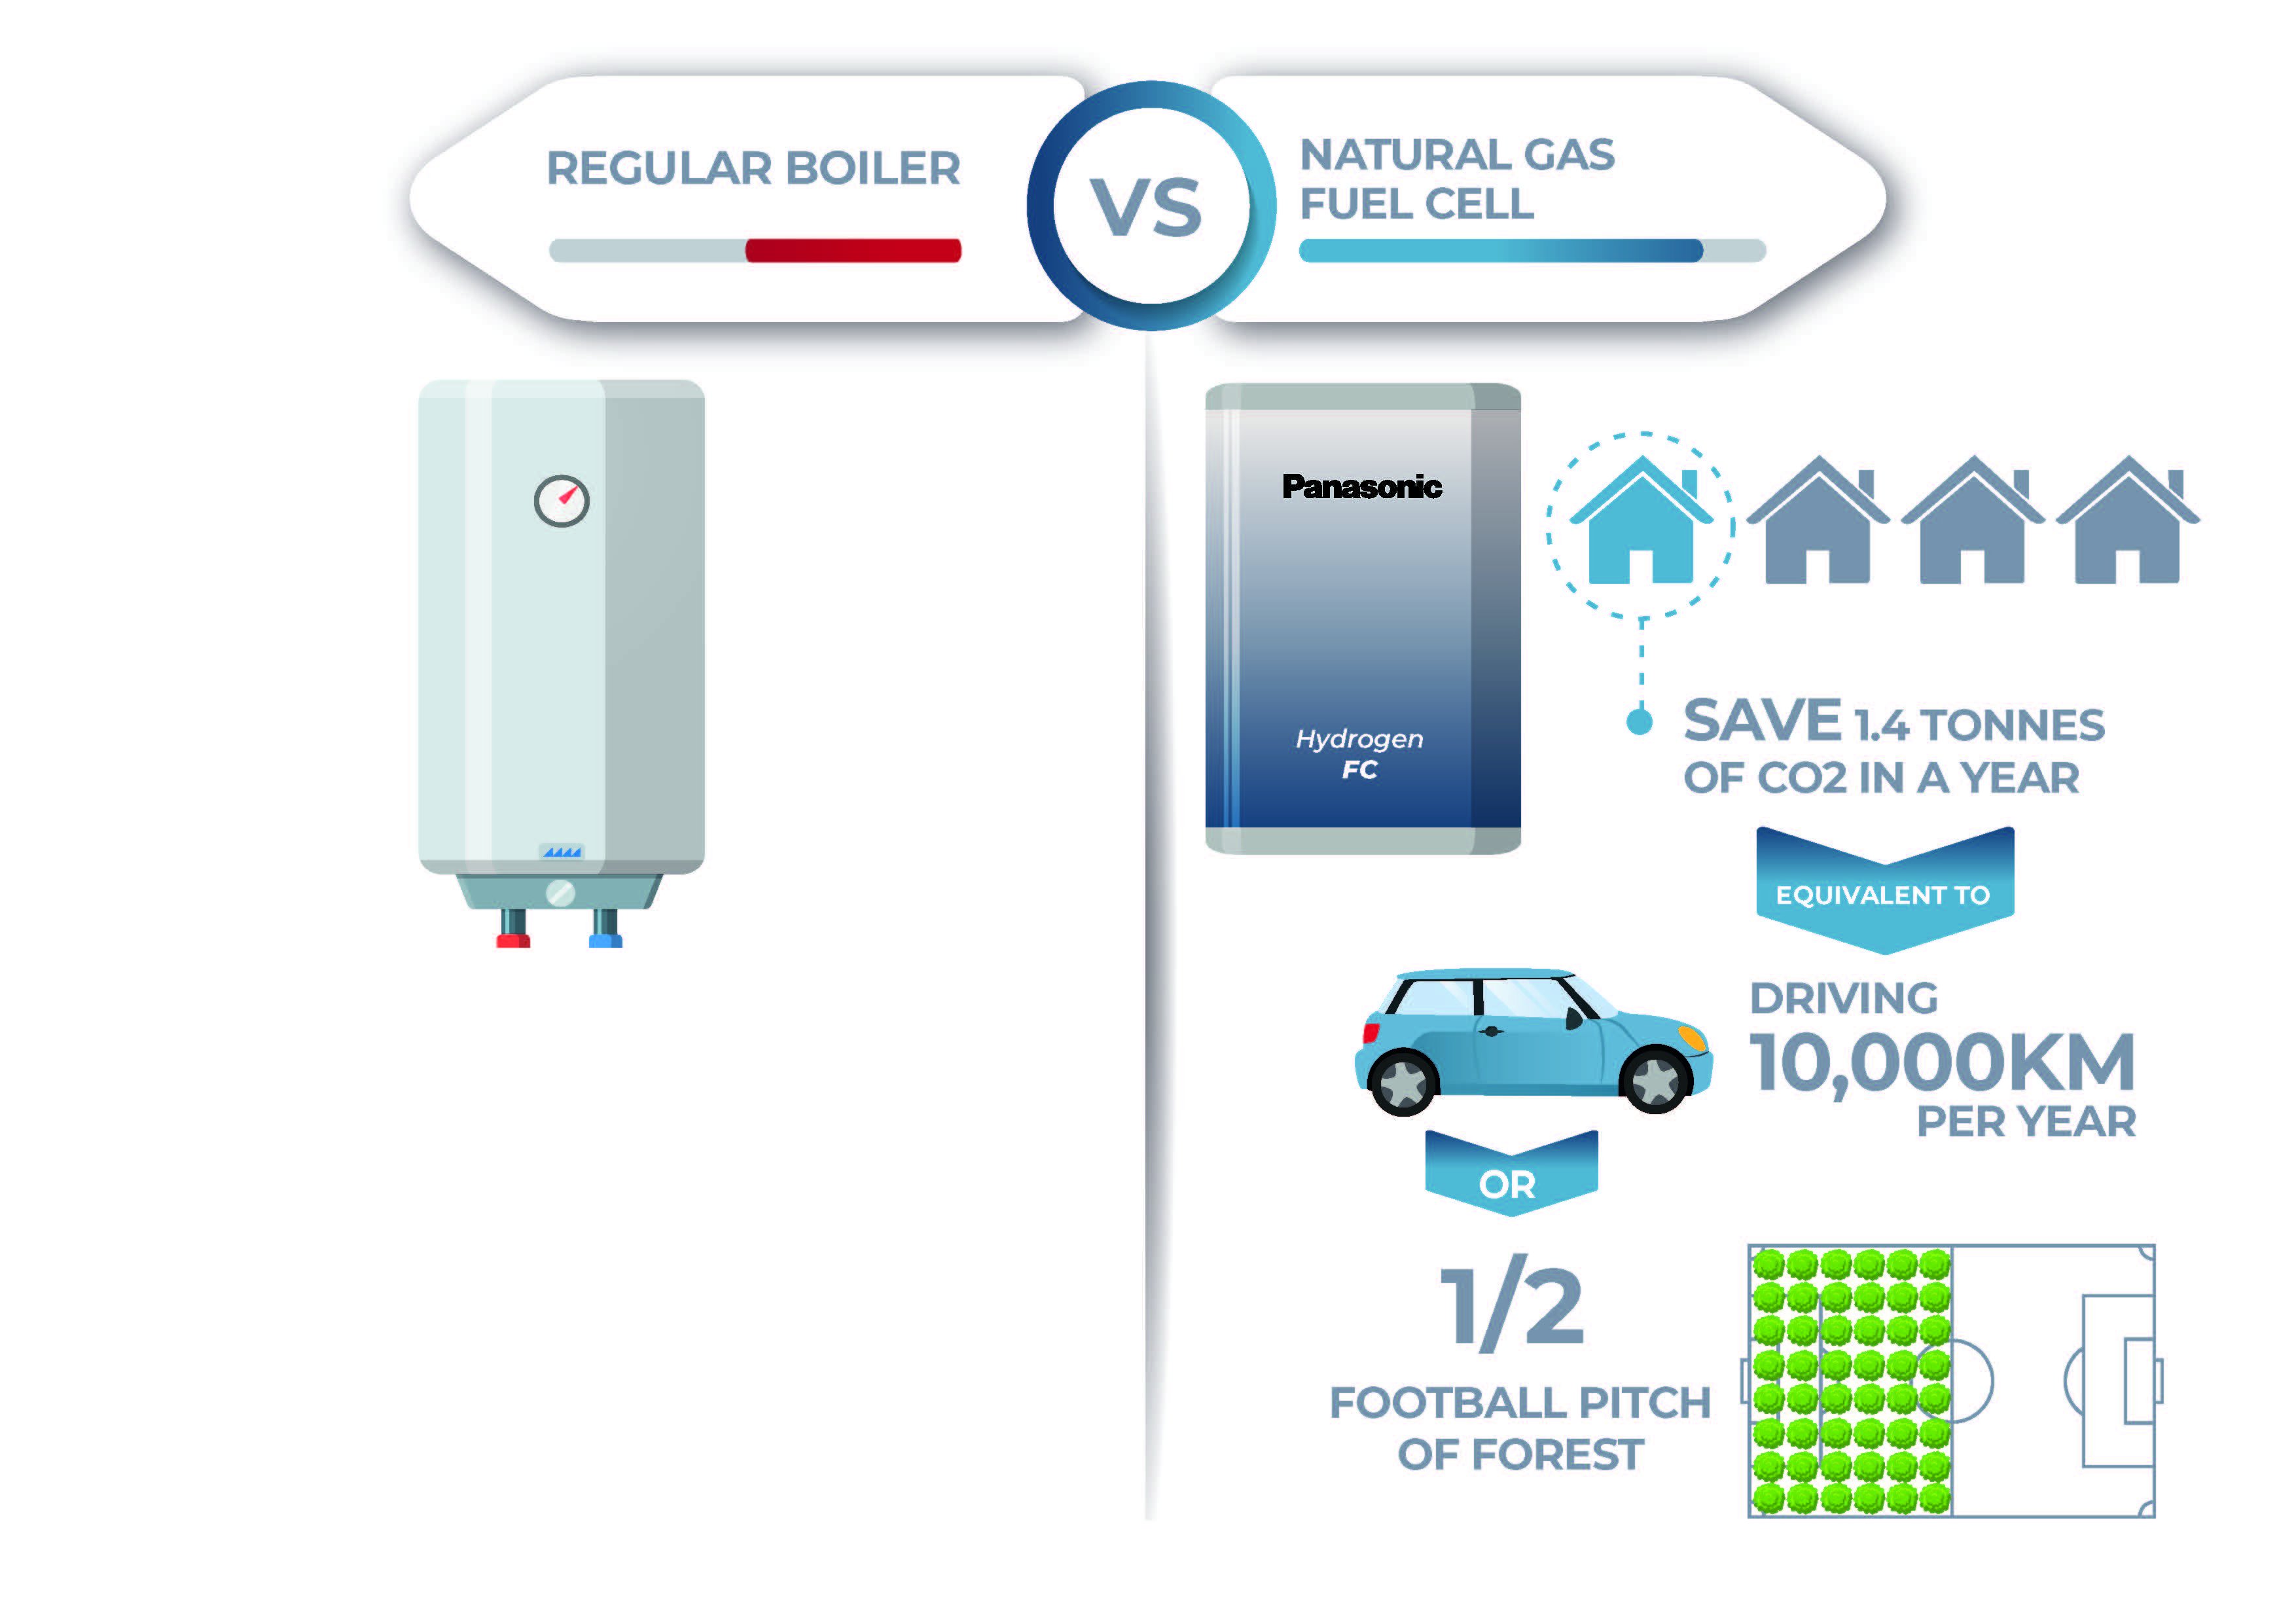 Comparison between a natural gas fuel cell system and a regular gas boiler. 